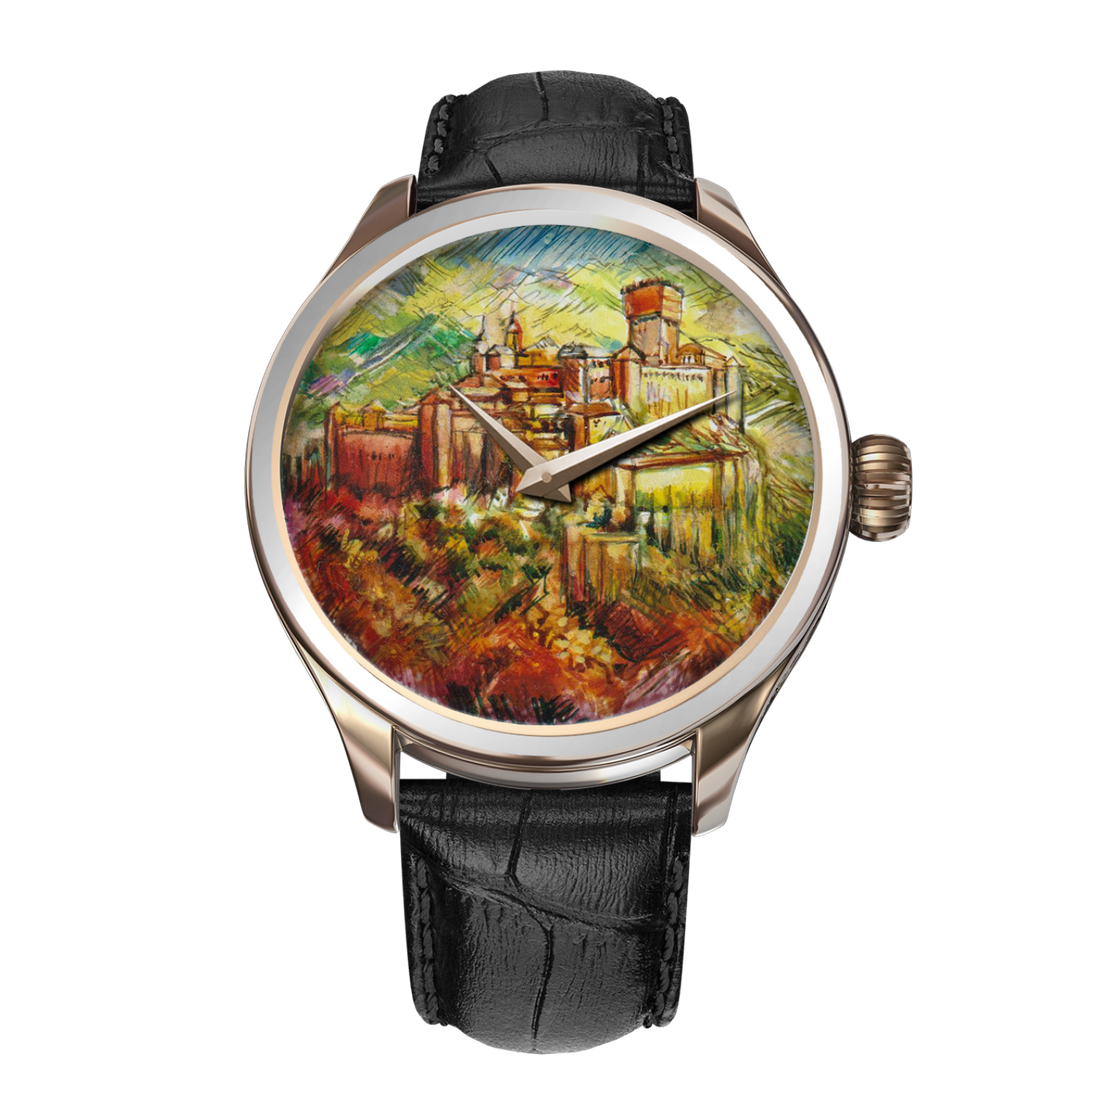 B360 Hand-painted Alhambra Watch: A Tribute to Andalusia's Beauty and History.